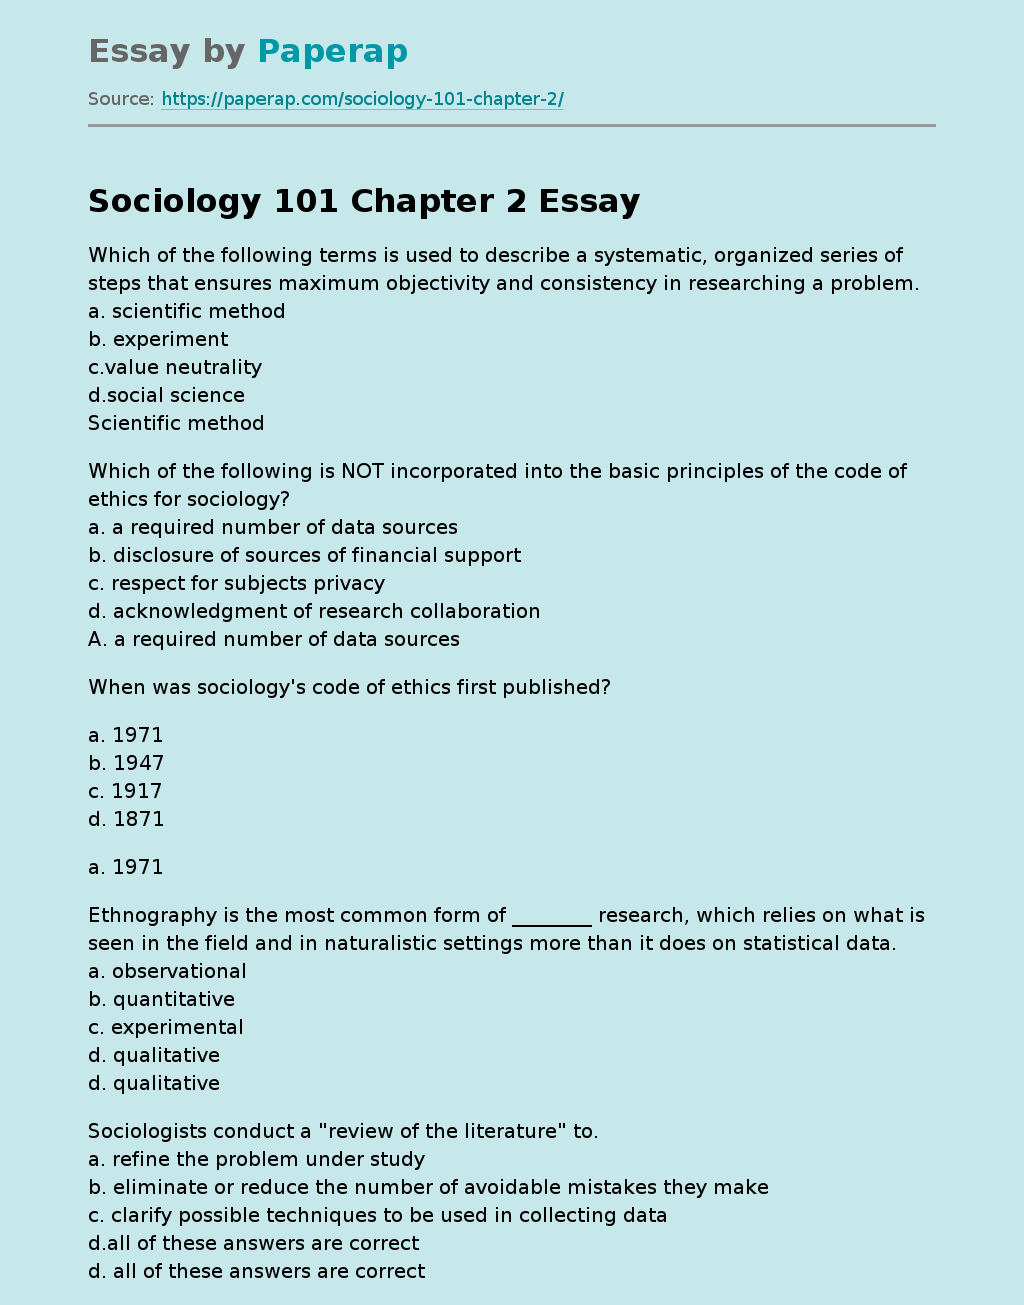 Sociology 101 Chapter 2